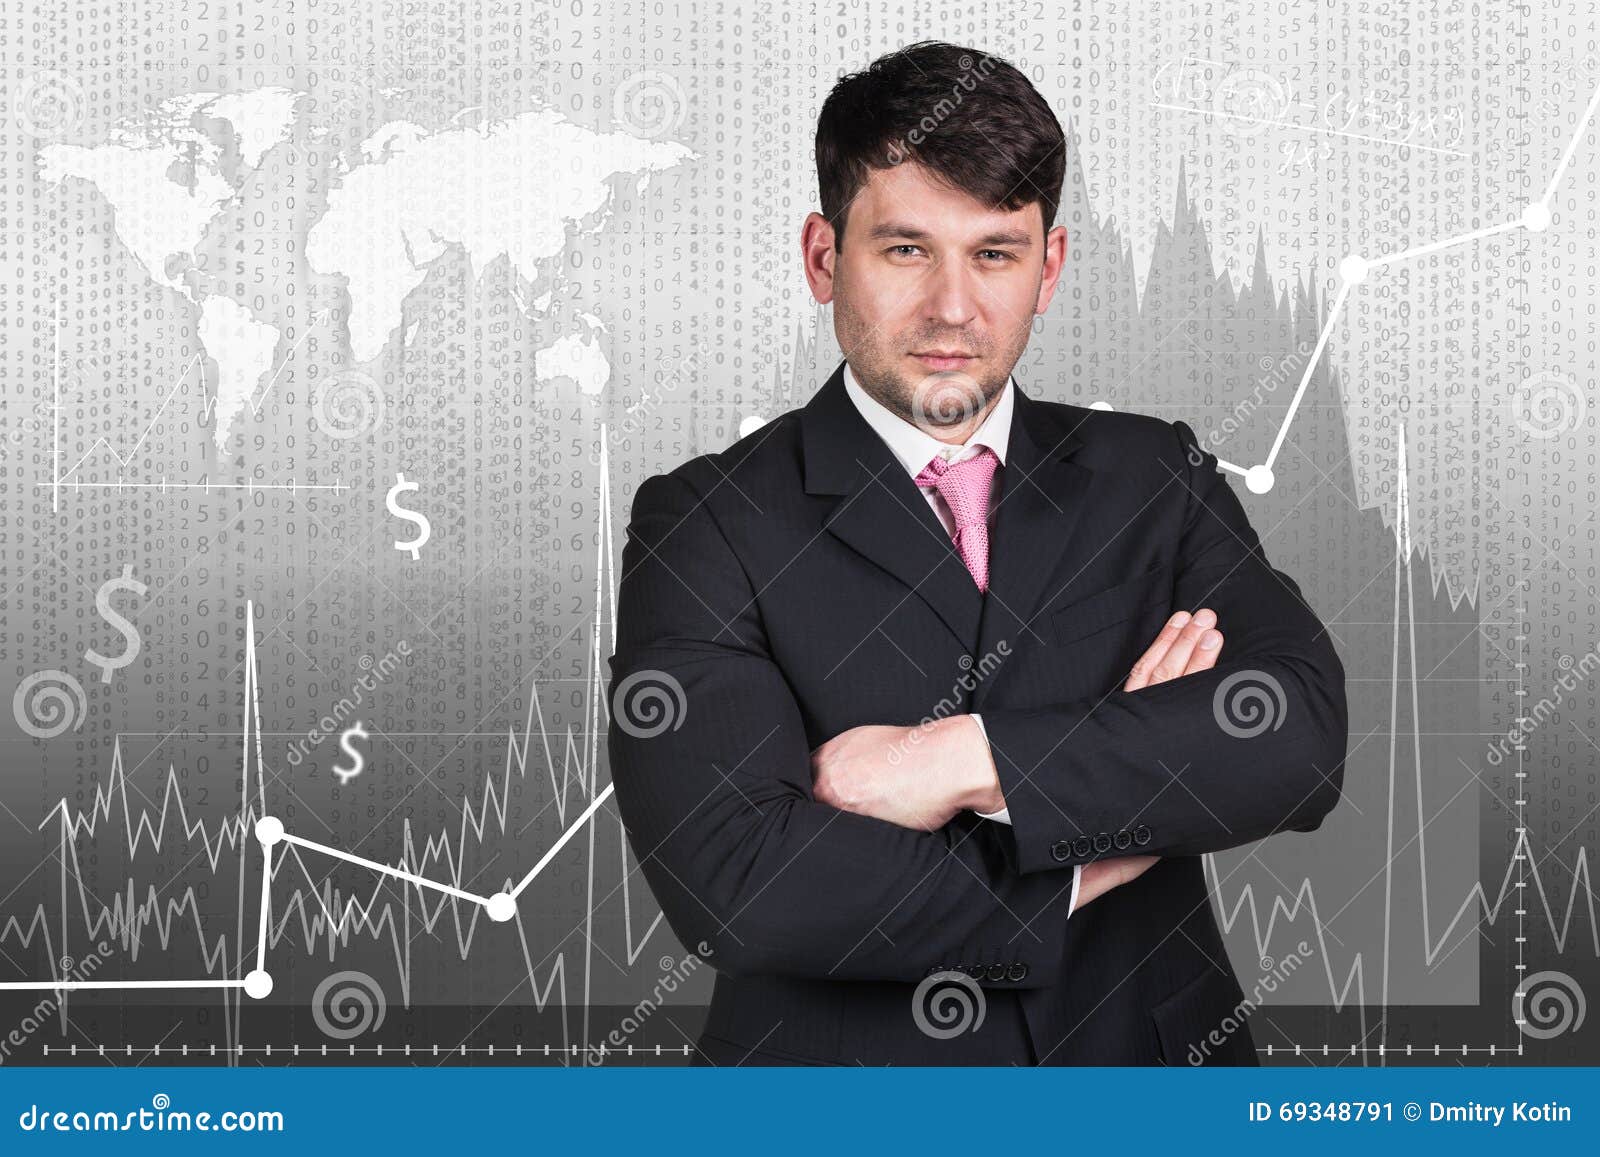 woman on the traiding graph background